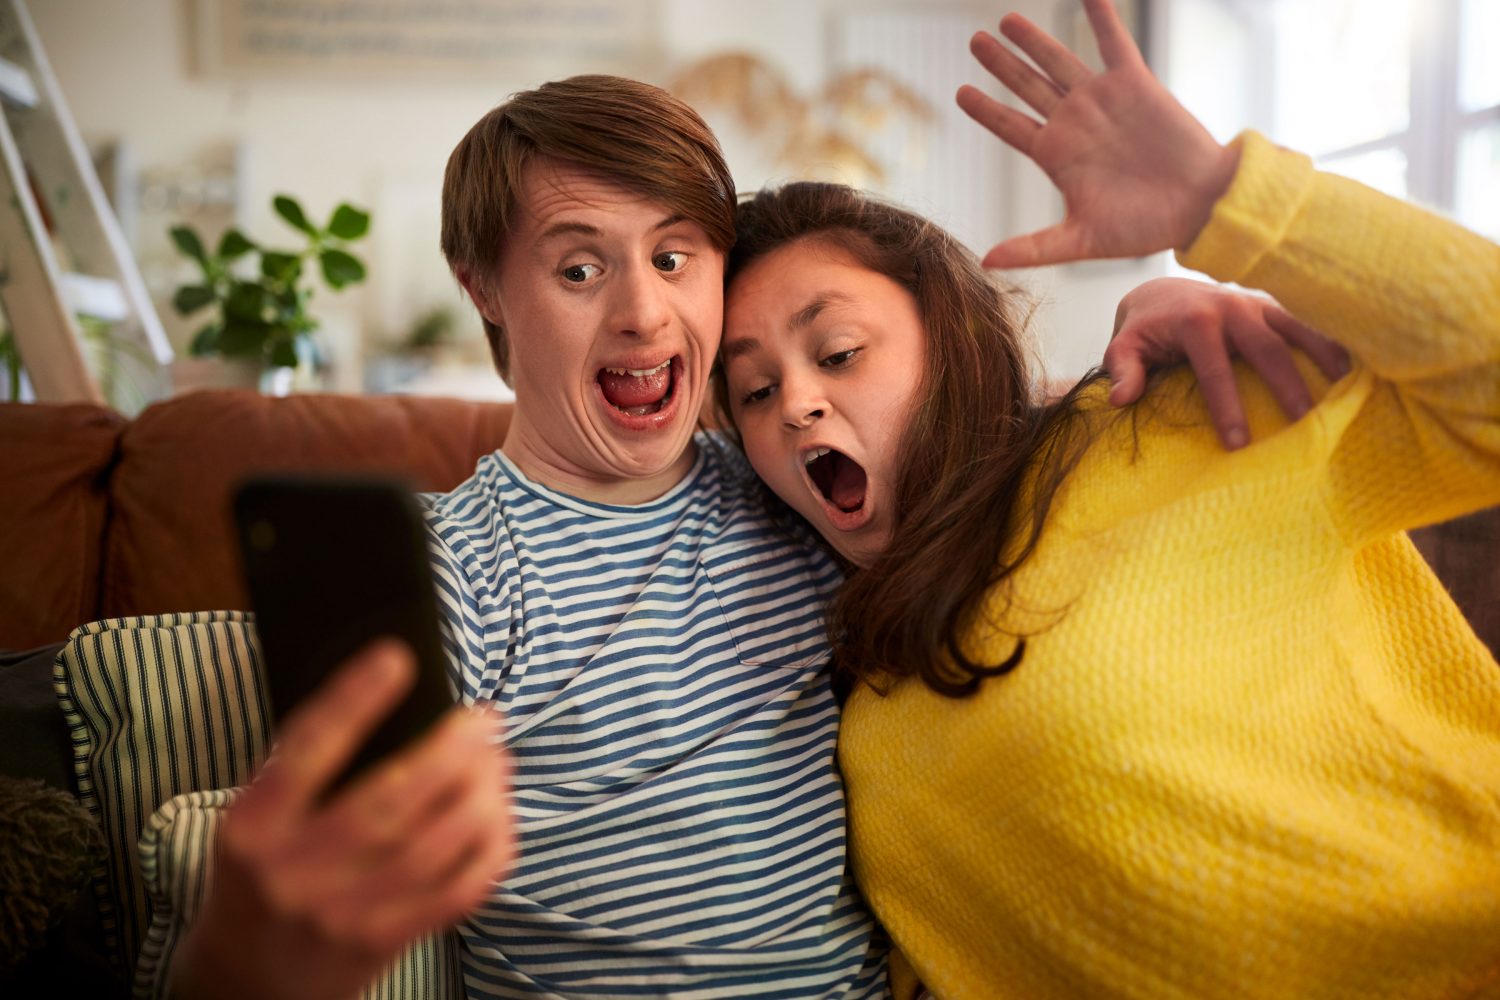 Couple with Down syndrome takes goofy selfie on the couch